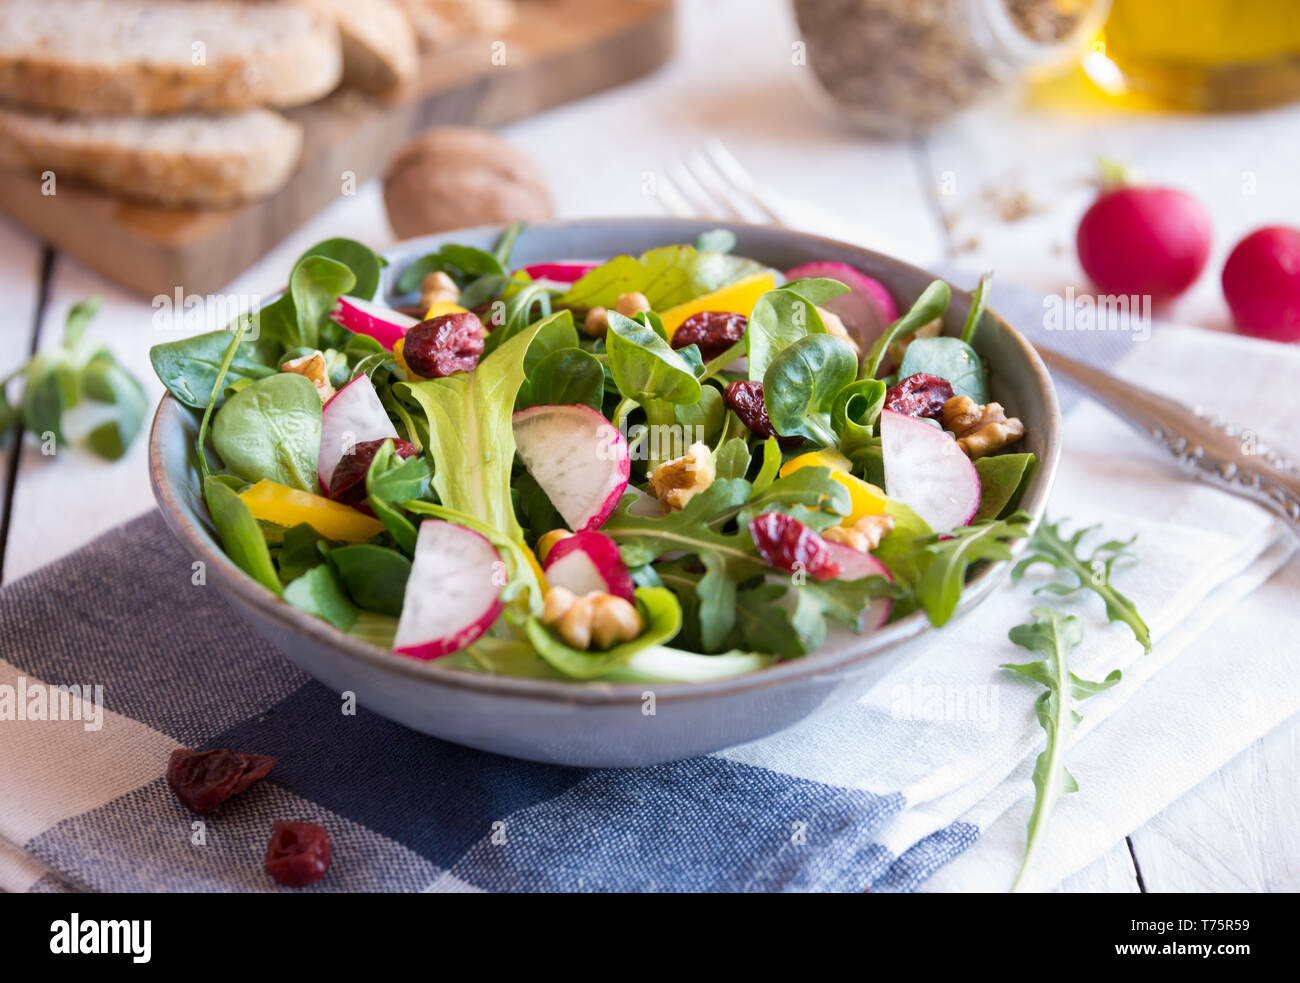 Fresh vegetable salad with radish, arugola, croutons in a bowl on white wood Stock Photo